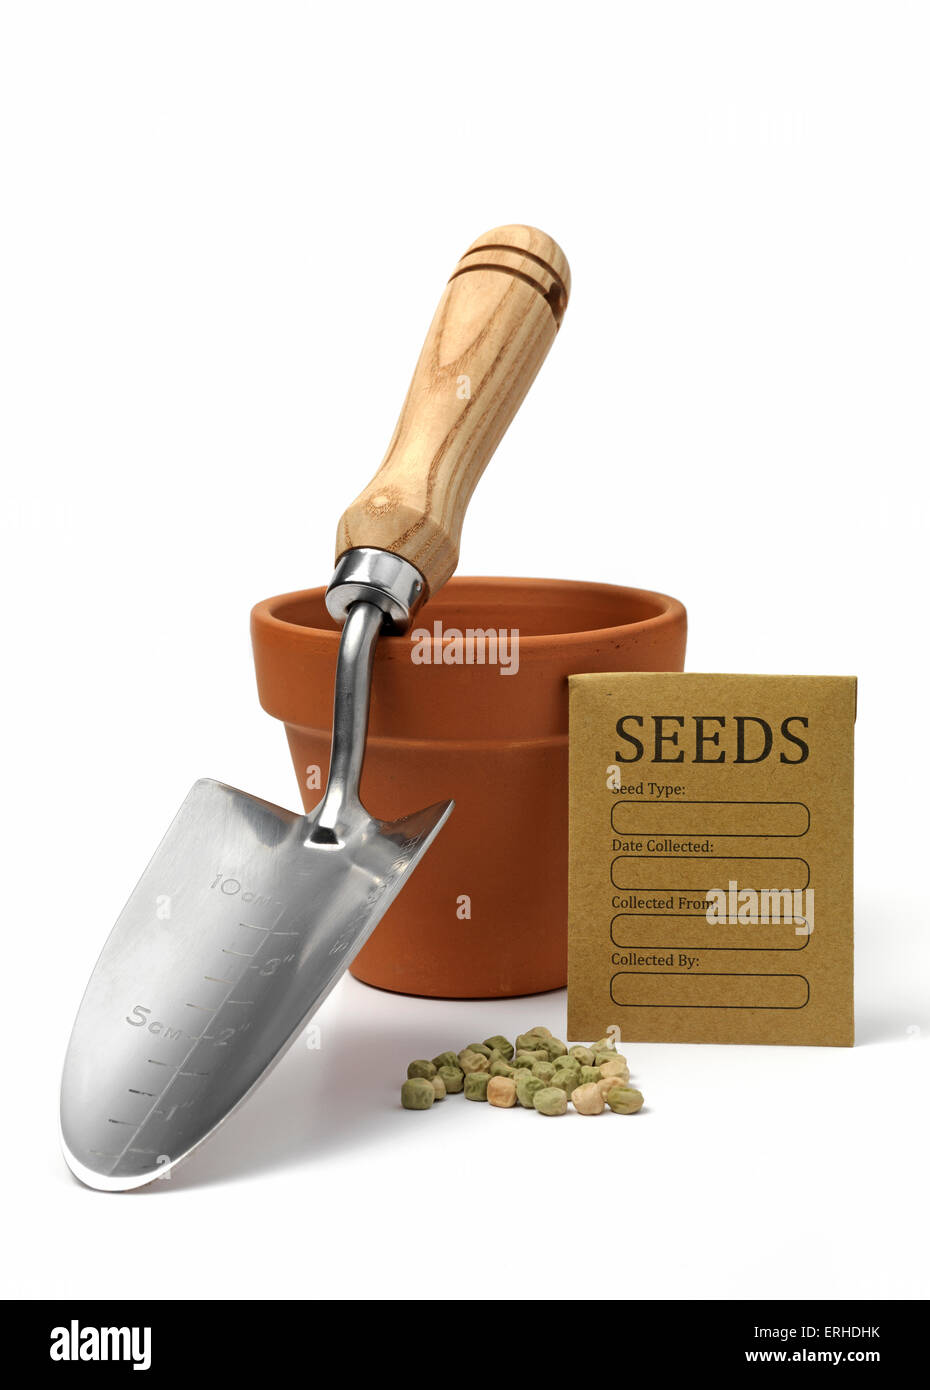 Garden trowel with seed packet and seeds Stock Photo